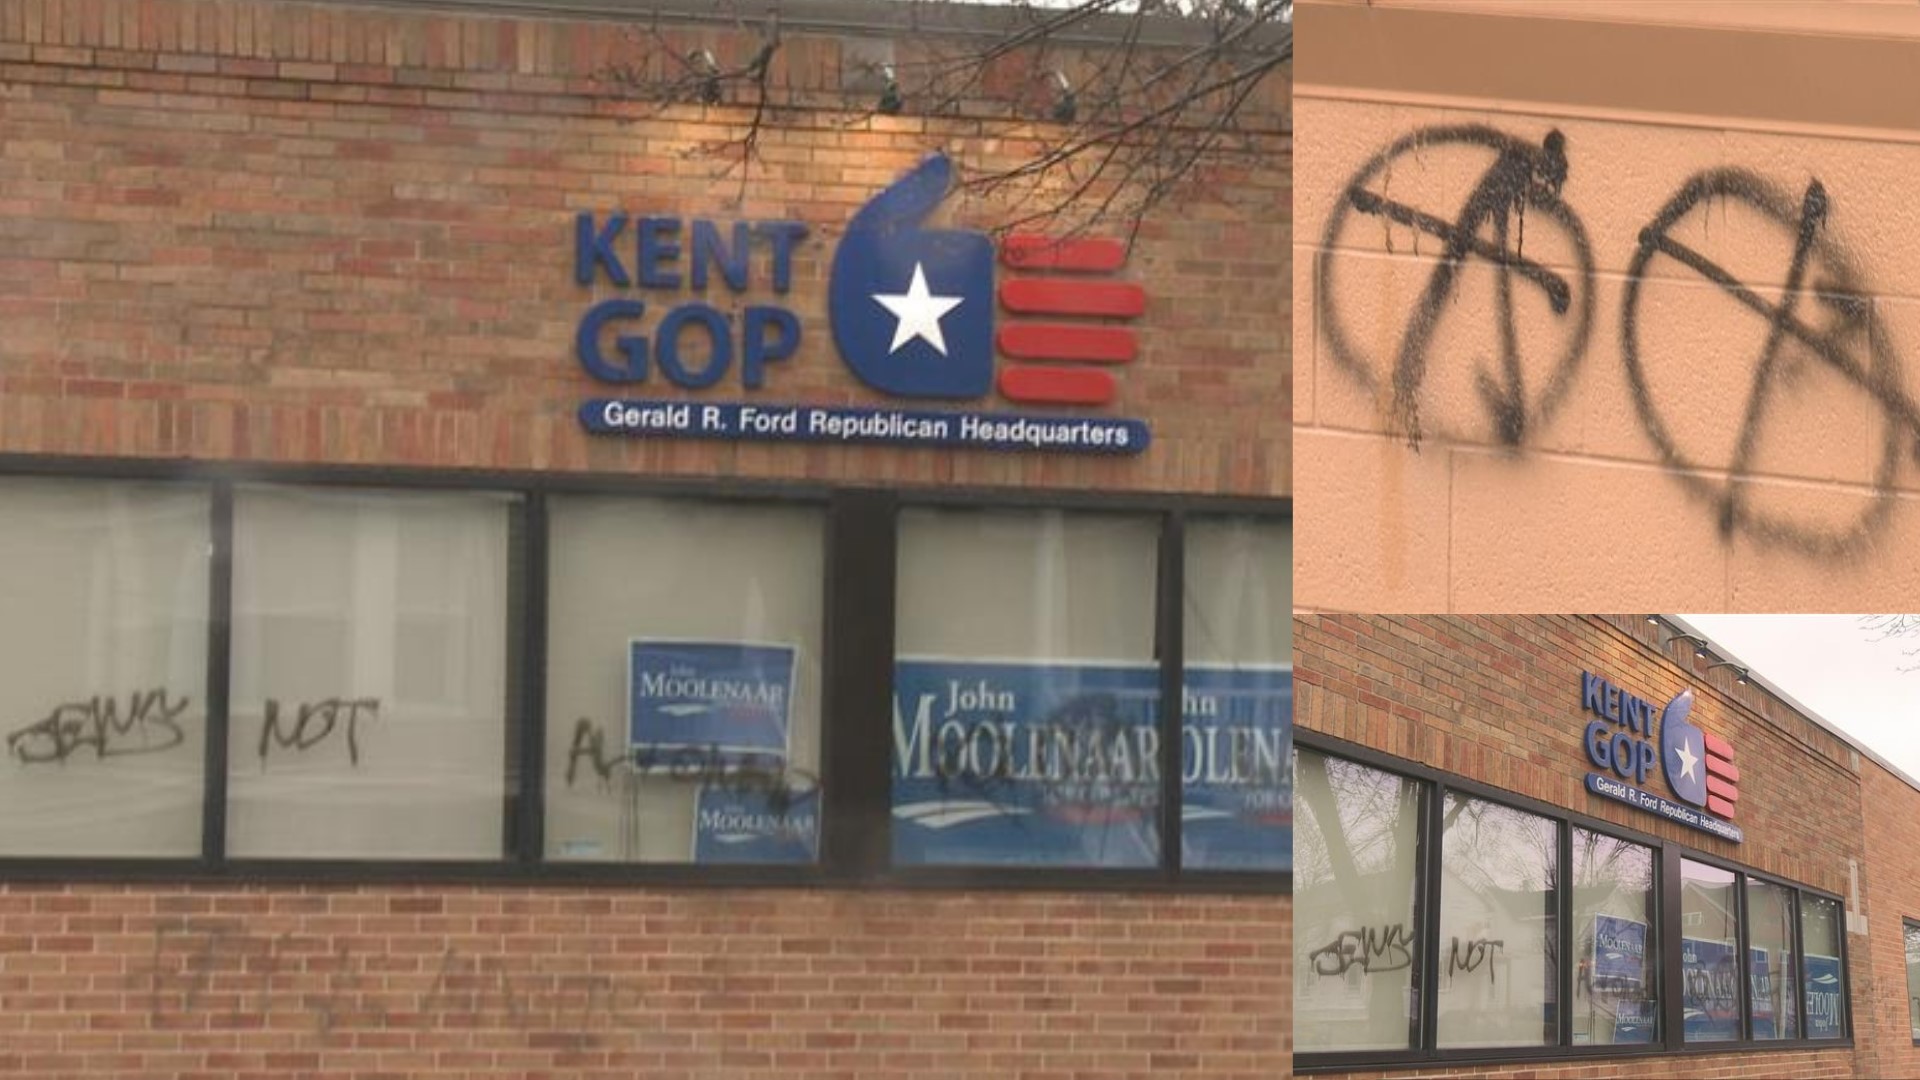 The building was found with racist, anti-Semitic messages and symbols spray-painted on the exterior early Tuesday morning.